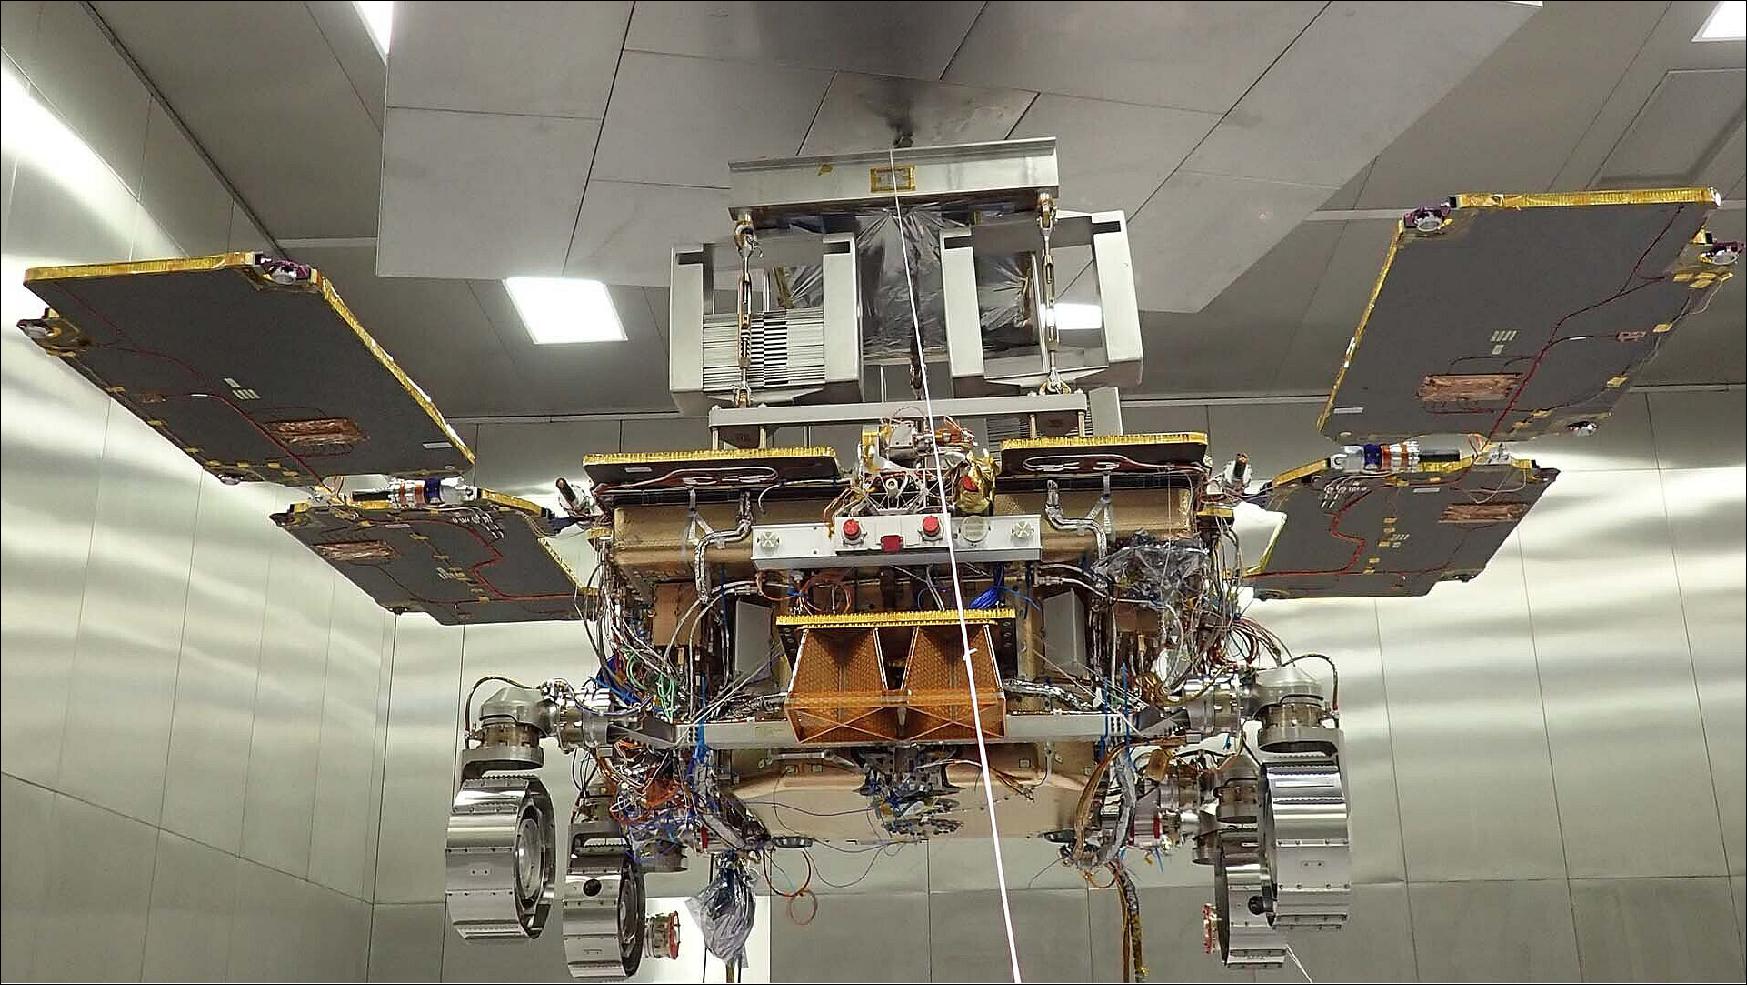 Figure 42: The ExoMars rover is part of the ExoMars program, a joint endeavor between ESA and the Russian State Space Corporation, Roscosmos (image credit: Airbus)